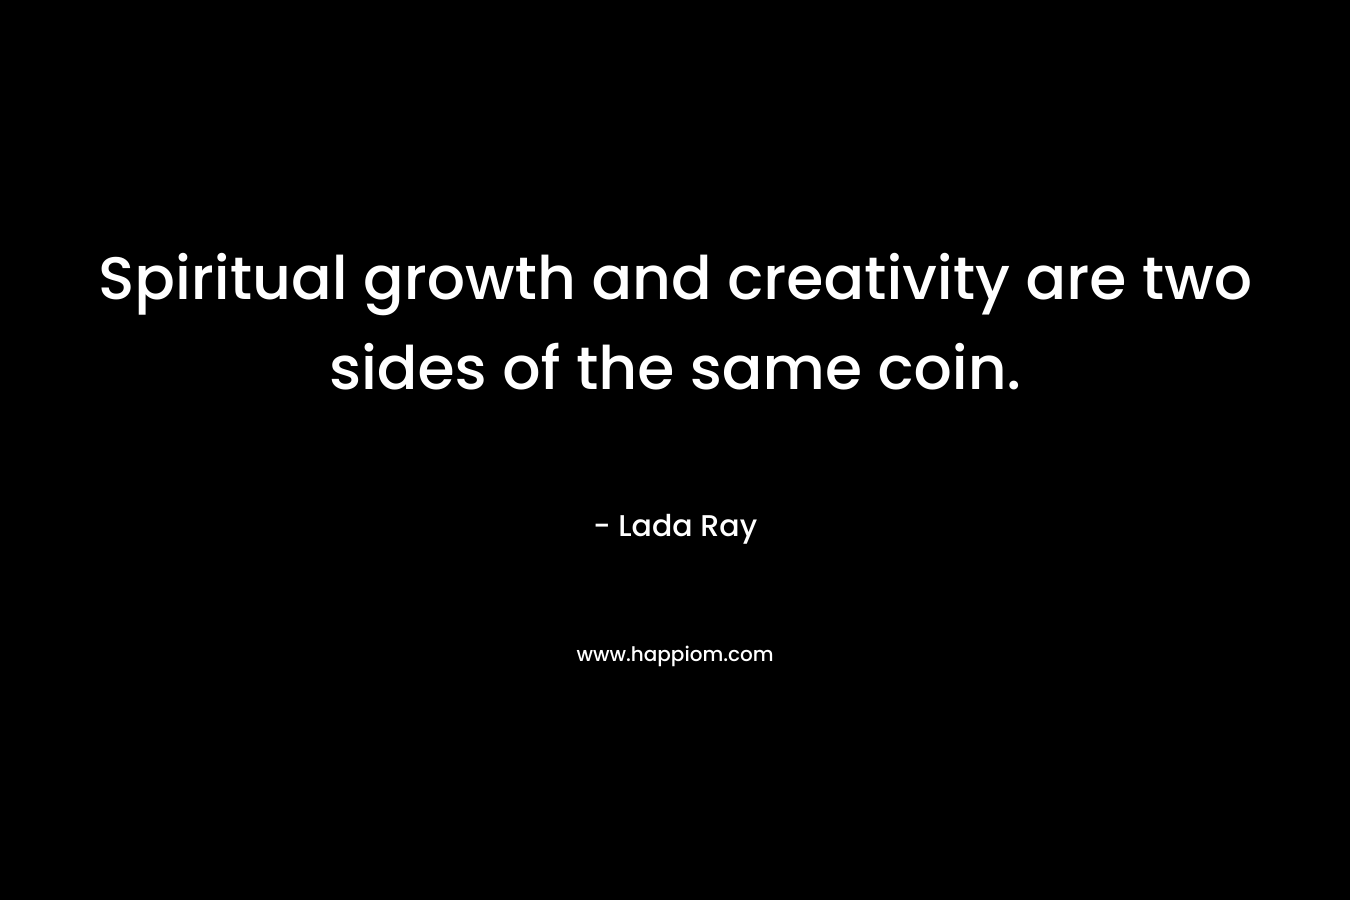 Spiritual growth and creativity are two sides of the same coin. – Lada Ray